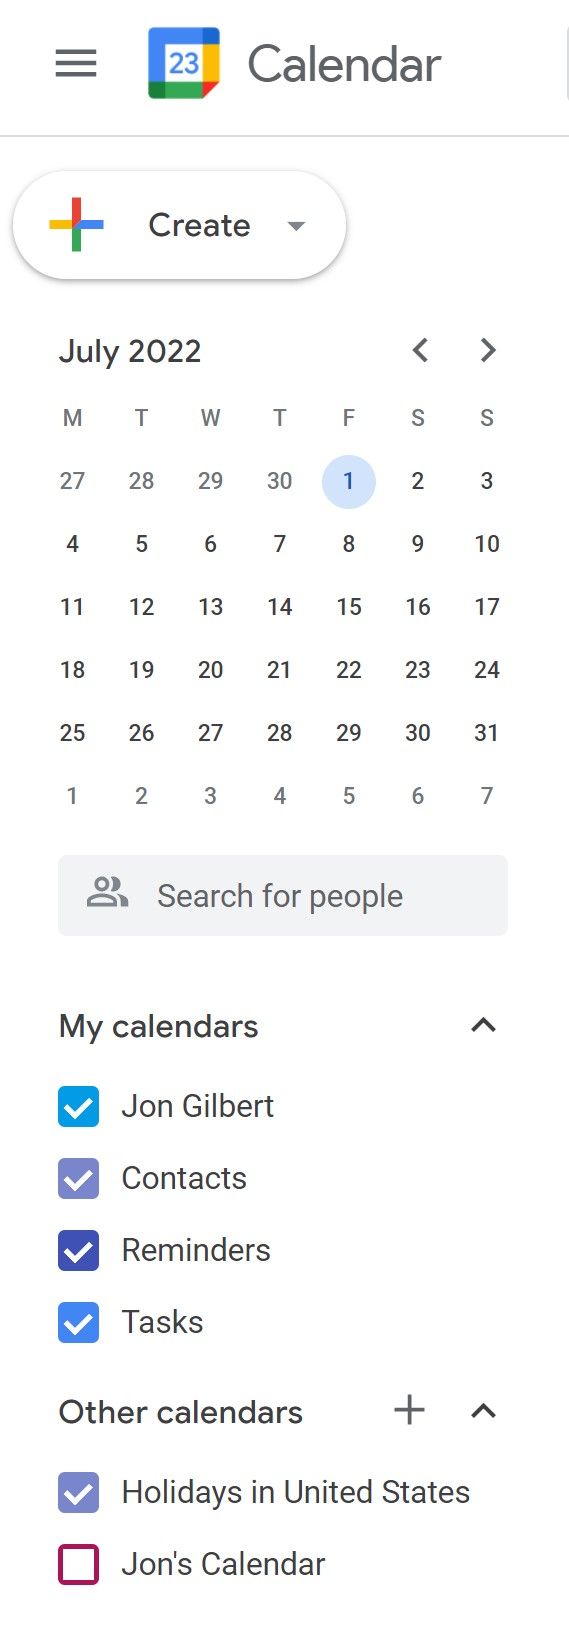 Hover over one of your calendars to access its menu.